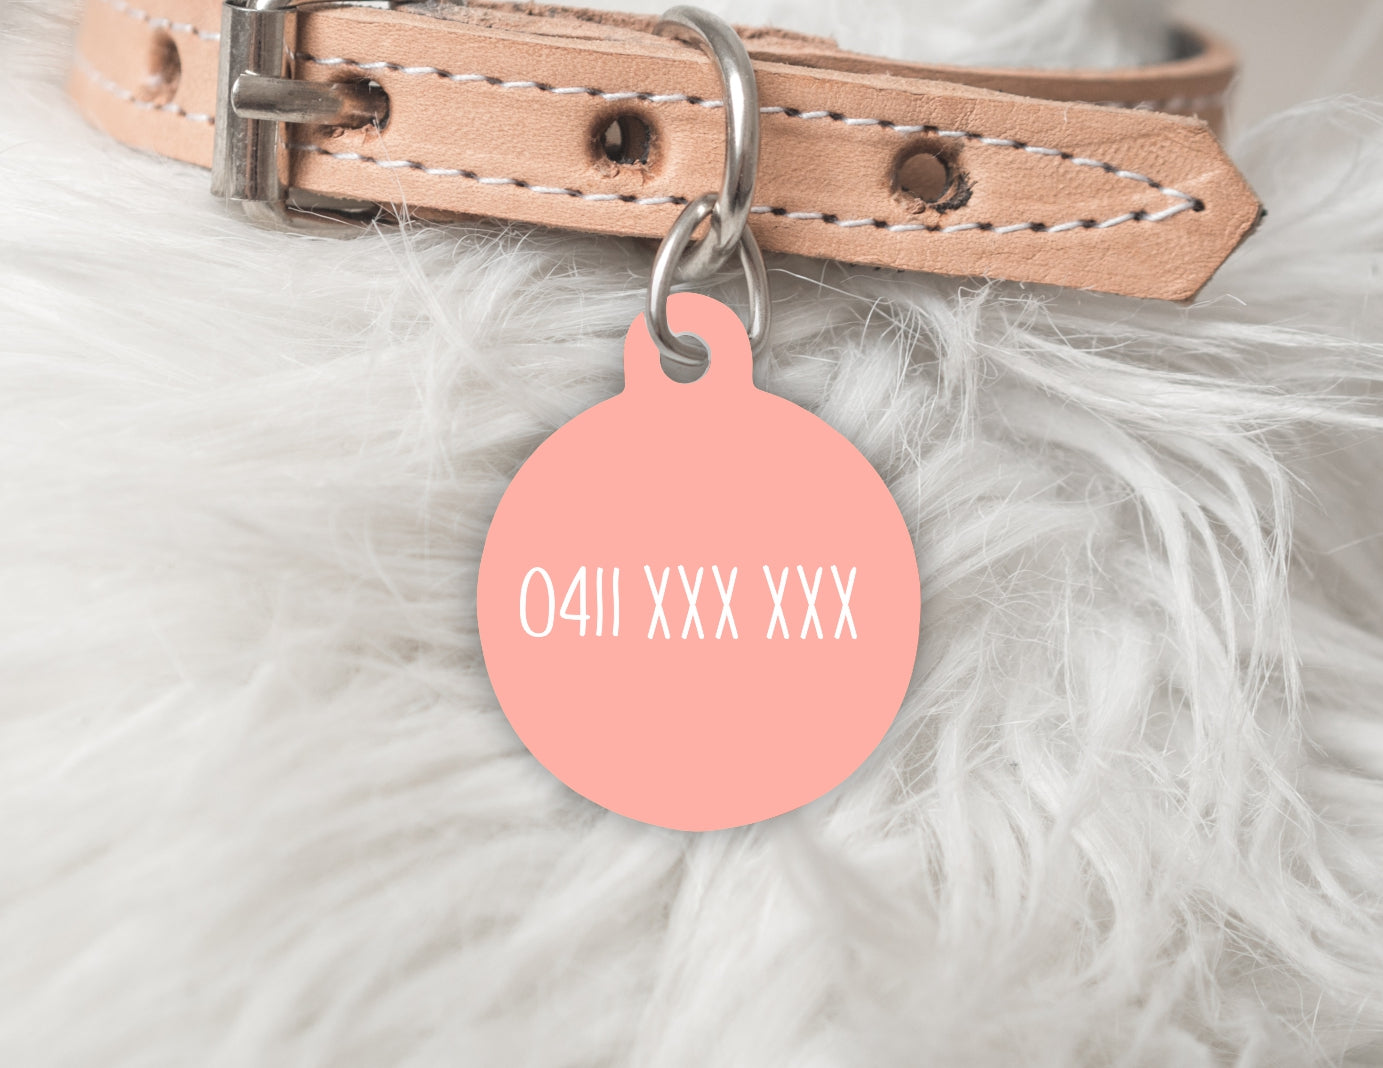 Summer Personalised Pet dog or cat ID Tag - Paw Paw